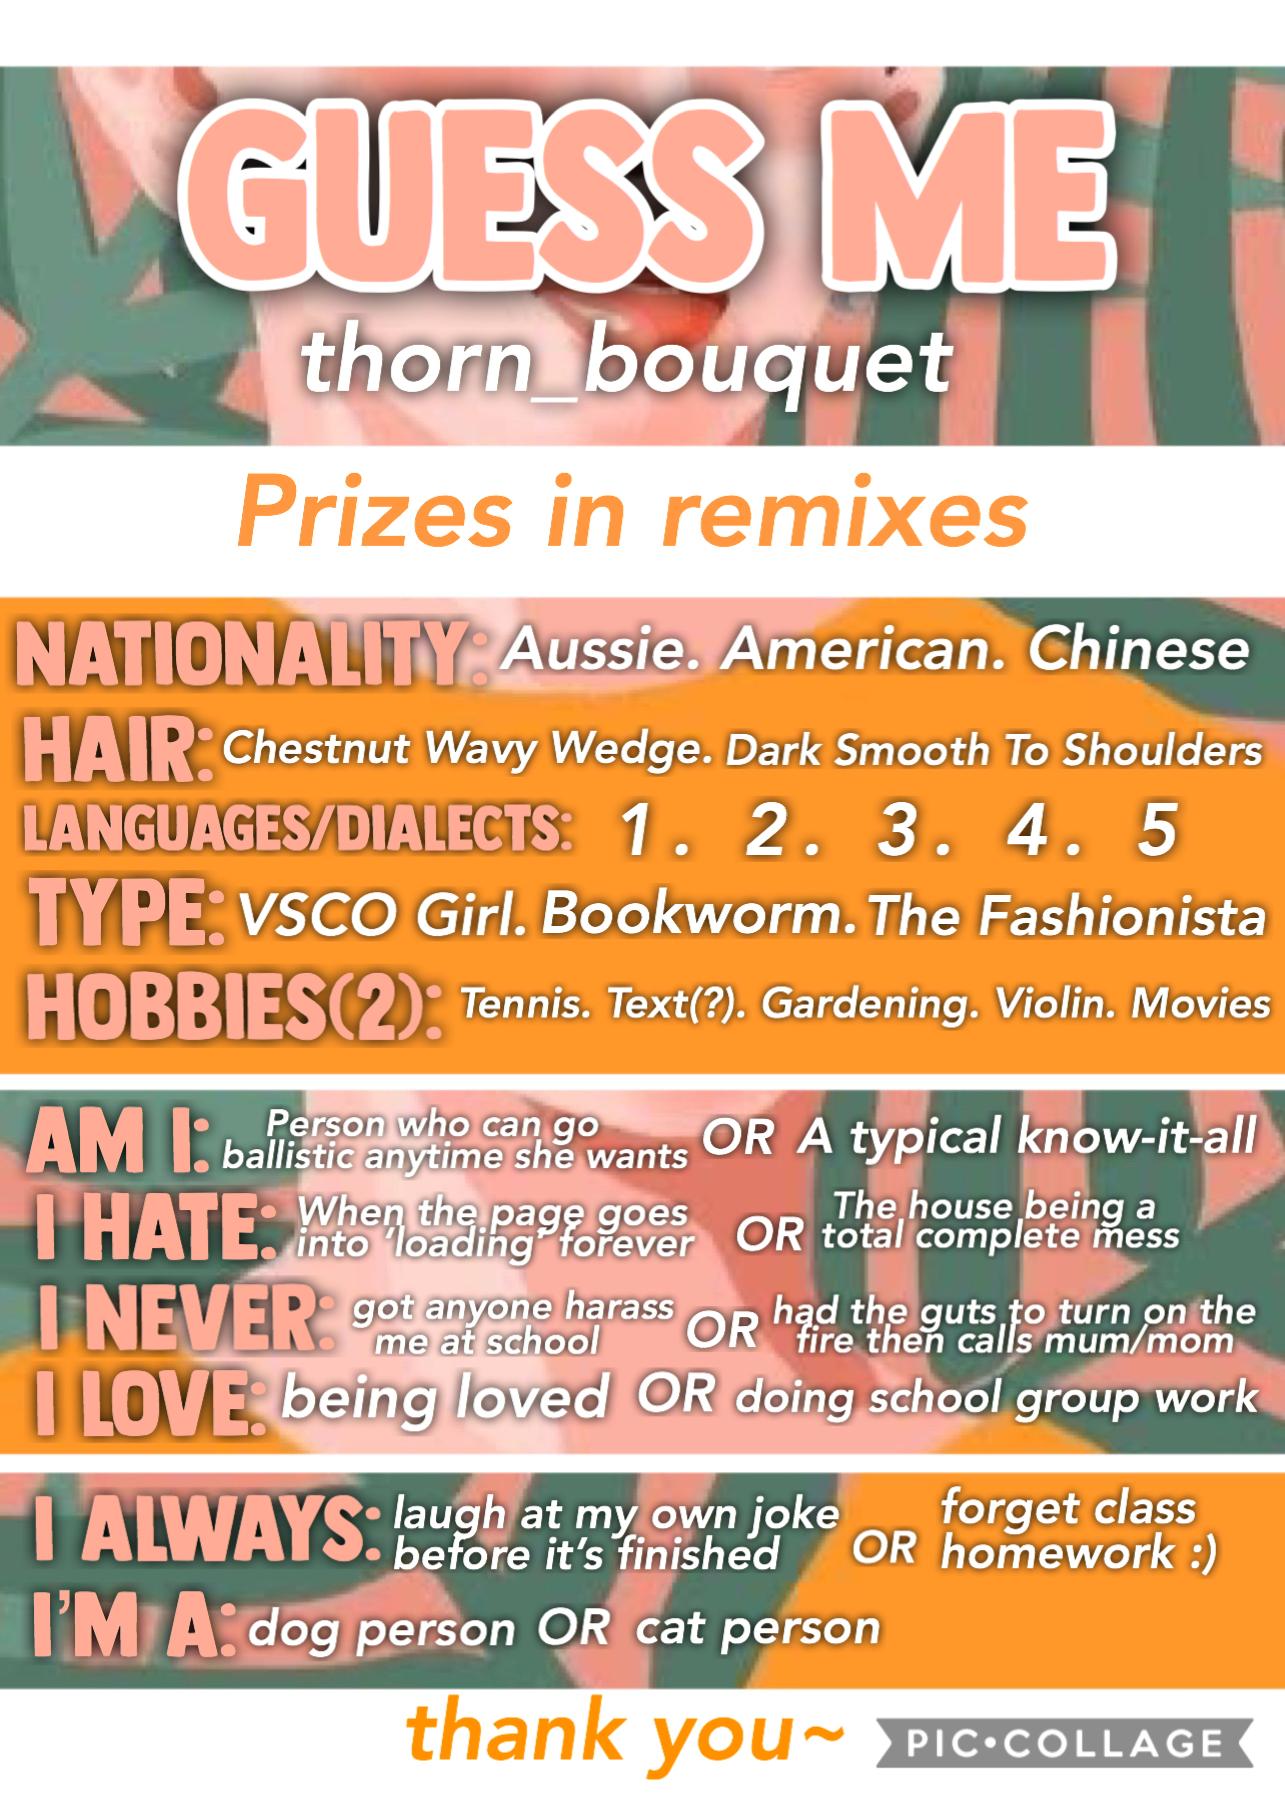 Guess Me -> 🉑 tapp 

yasss here is a Guess Me 🥰 I am really excited to see what you guys think I am like 🤔 Anyways, no pressure! This just a little activity for fun 💕
🪁Prizes in Remixes🪁